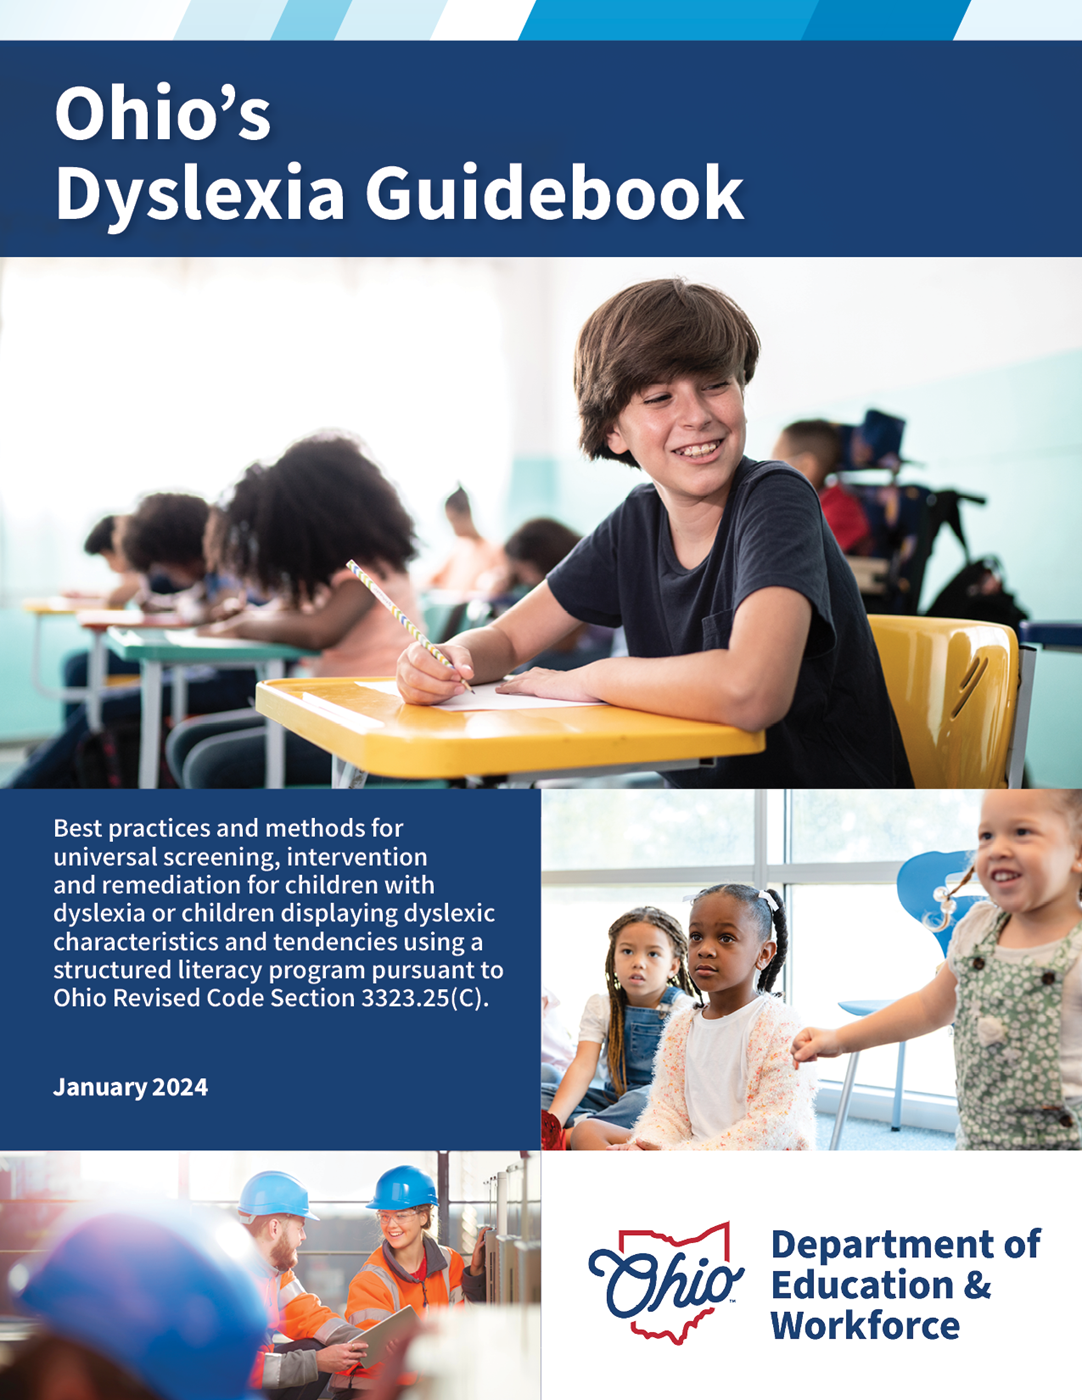 Thumbnail image of Dyslexia Guidebook cover